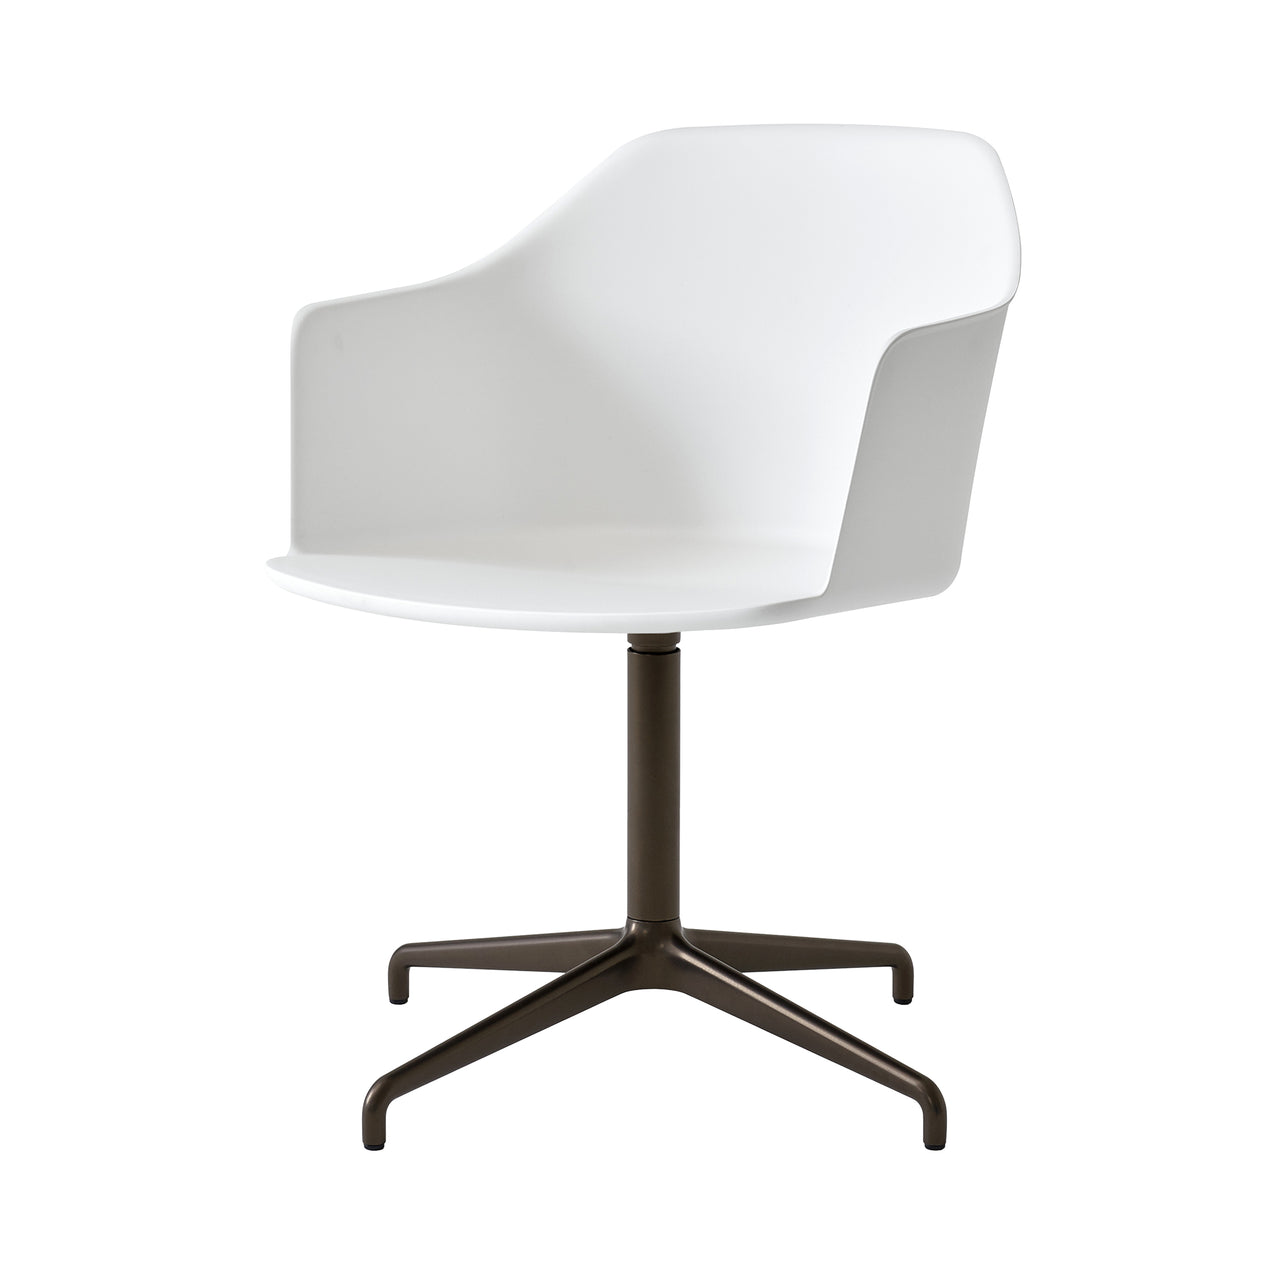 Rely Chair HW43: White + Bronzed